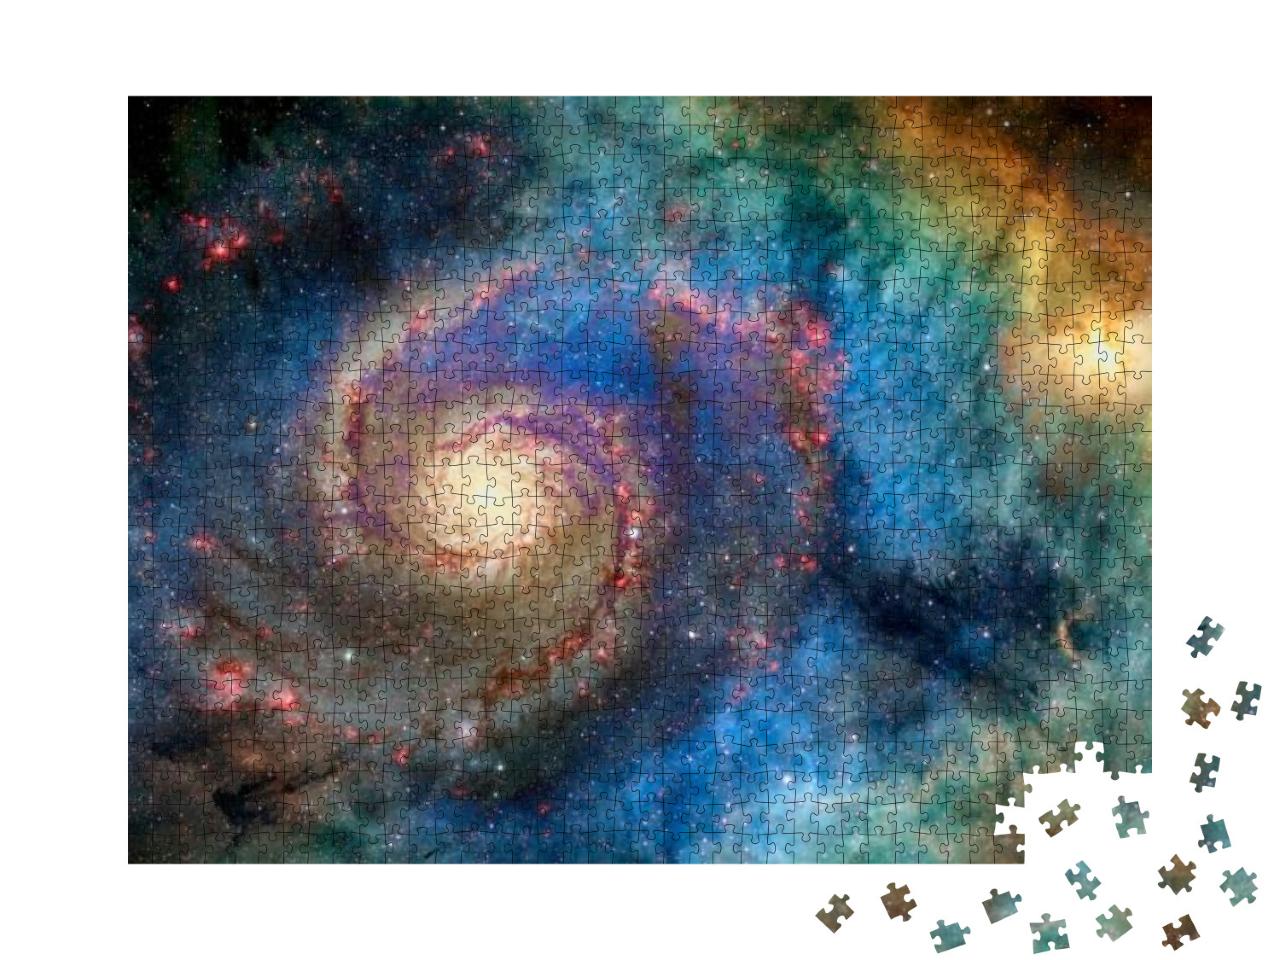 Awesome Spiral Galaxy Many Light Years Far from the Earth... Jigsaw Puzzle with 1000 pieces